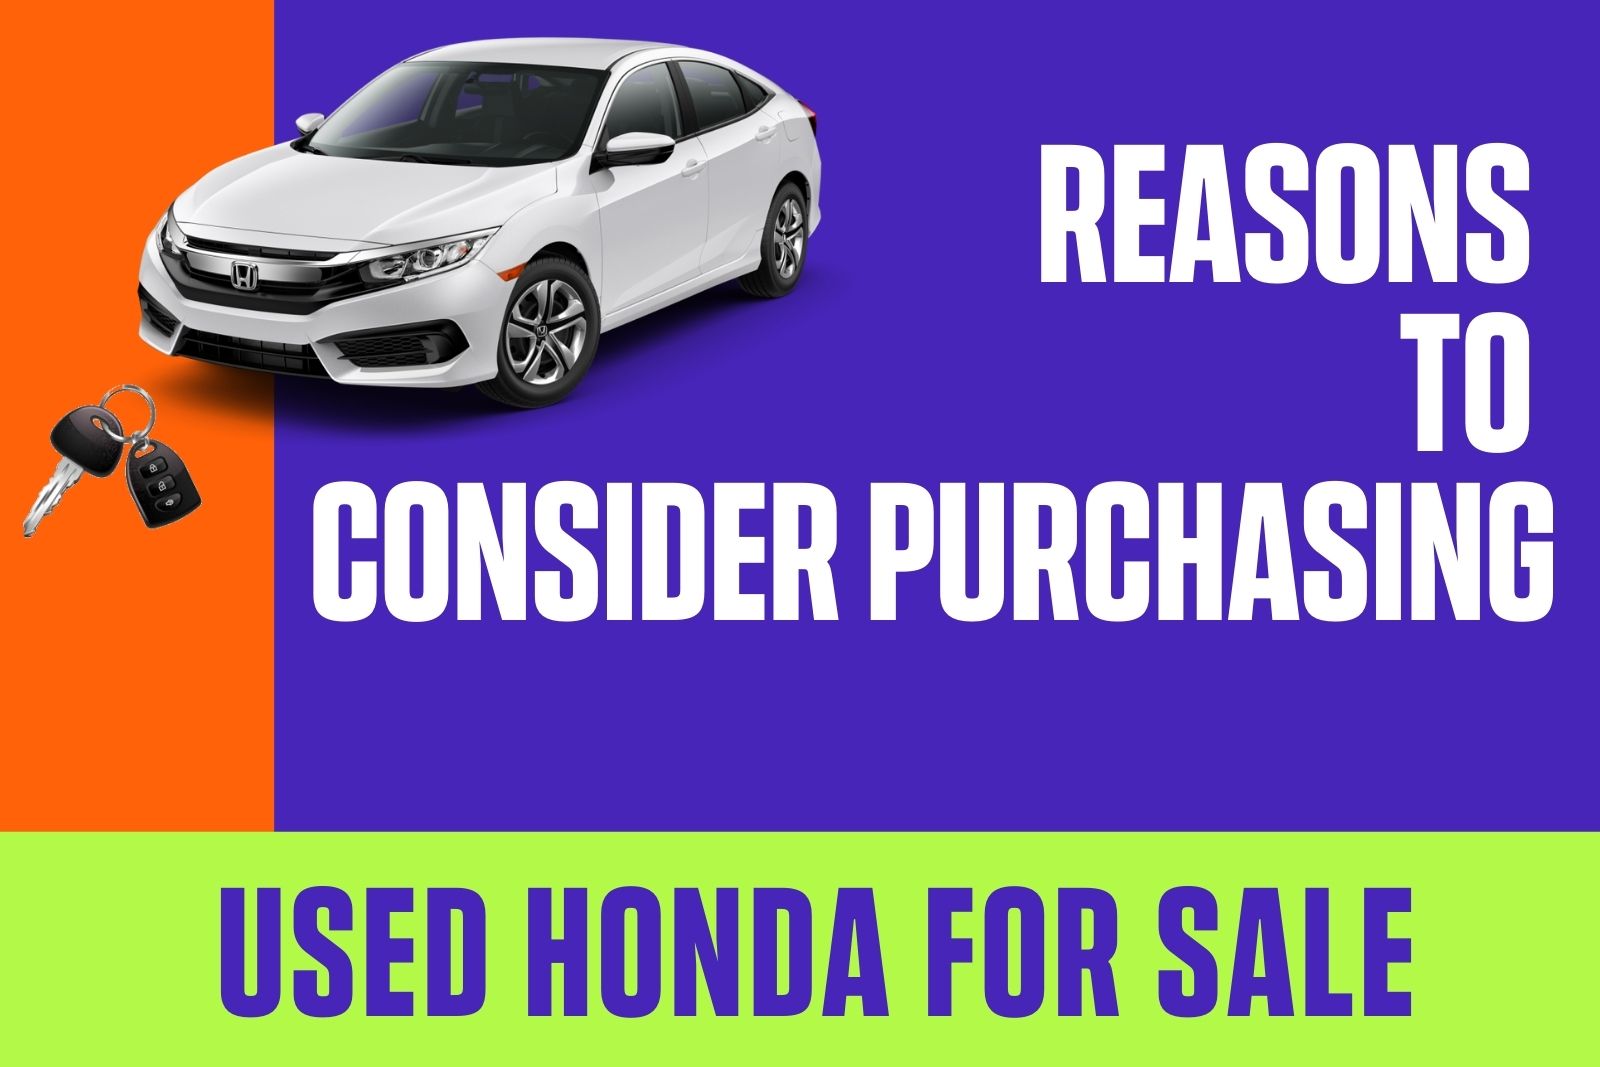 Reasons To Consider Purchasing Used Honda For Sale